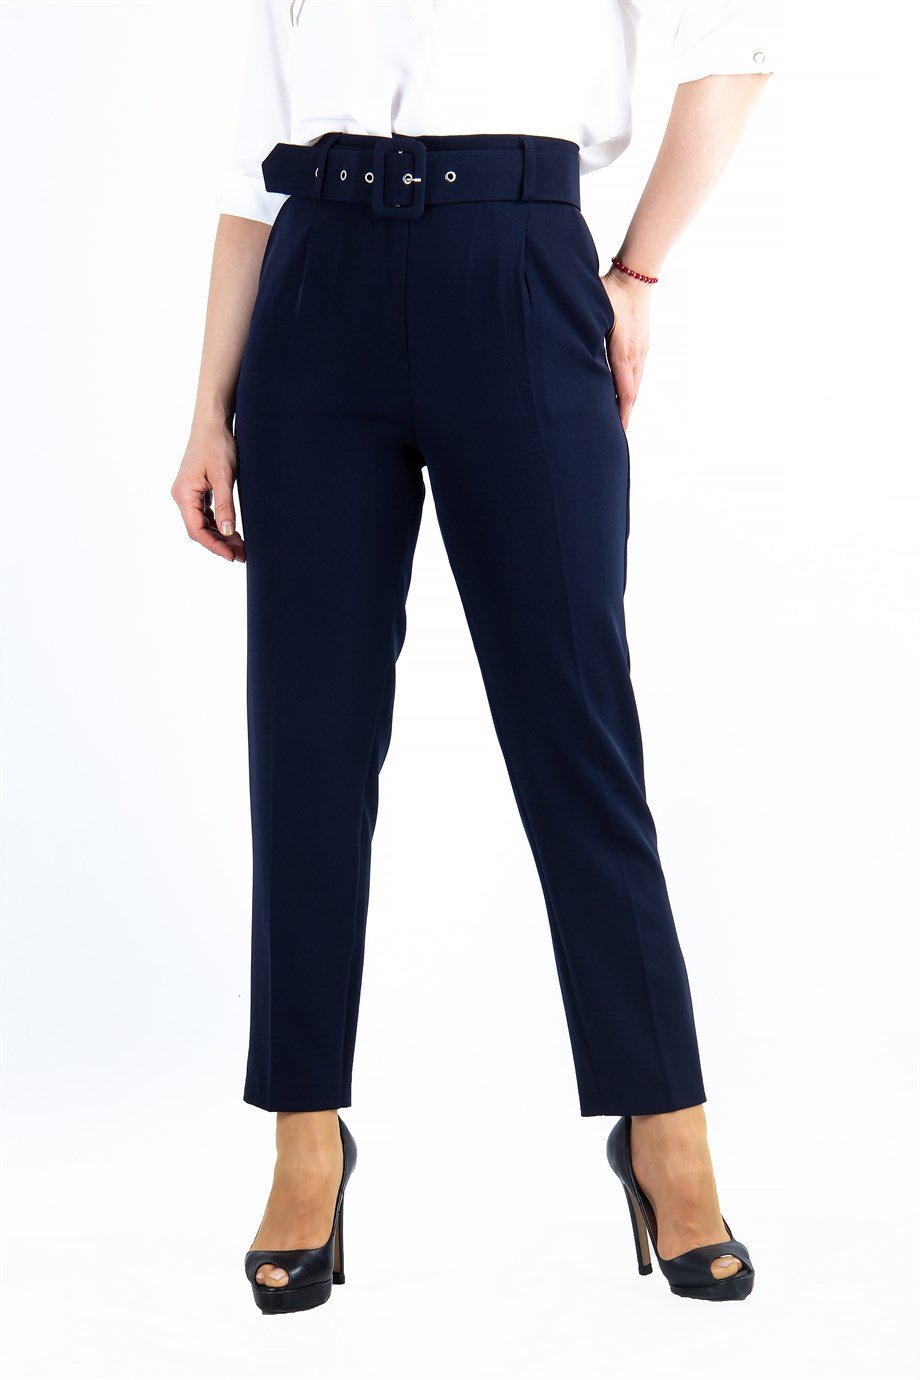 Pants are the most comfortable piece of clothing and have been the perfect  choice for most women even if they … | Formal pants women, Type of pants,  Pants for women